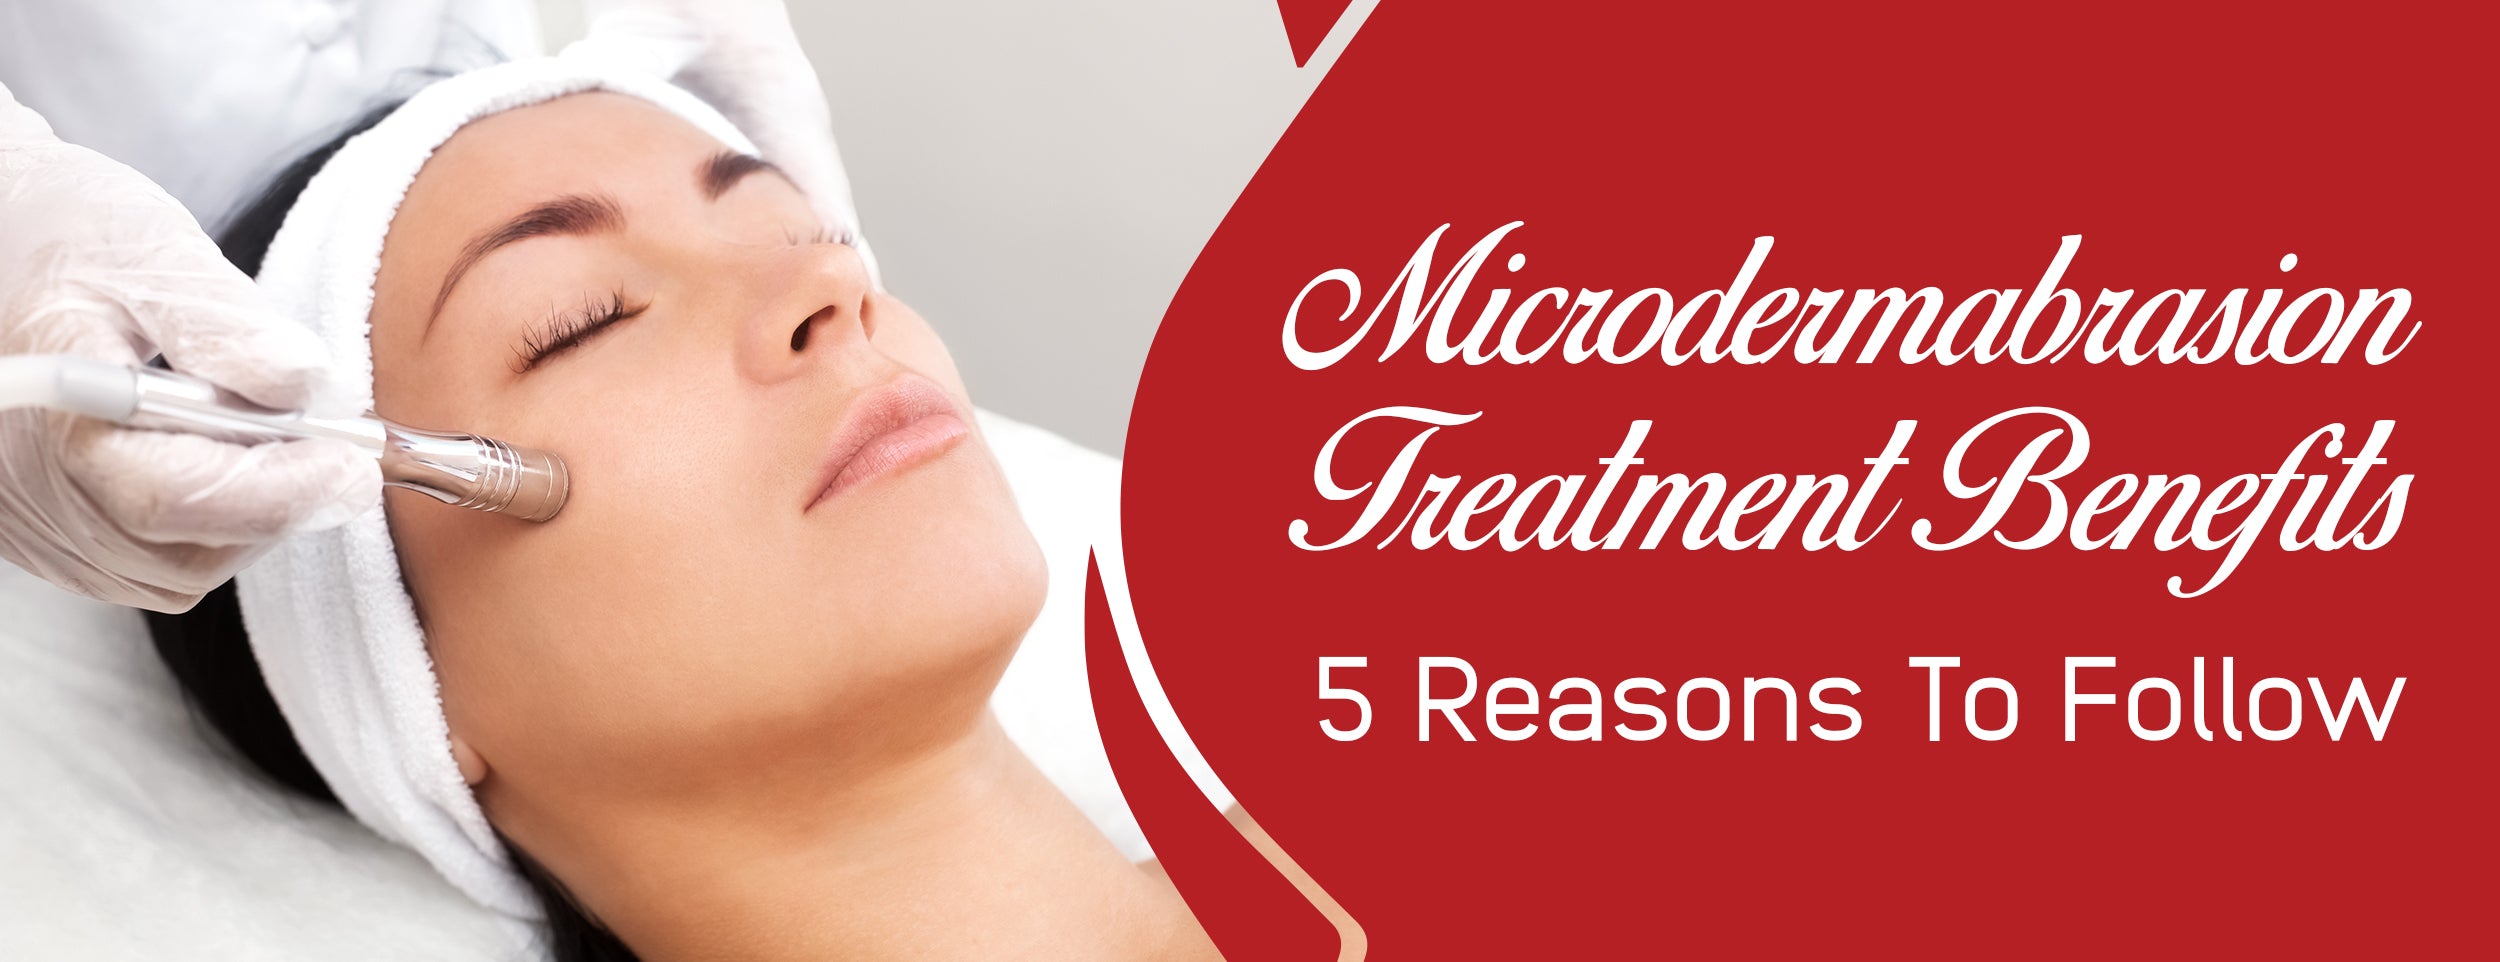 5 cosmetic and 5 health benefits of microdermabrasion